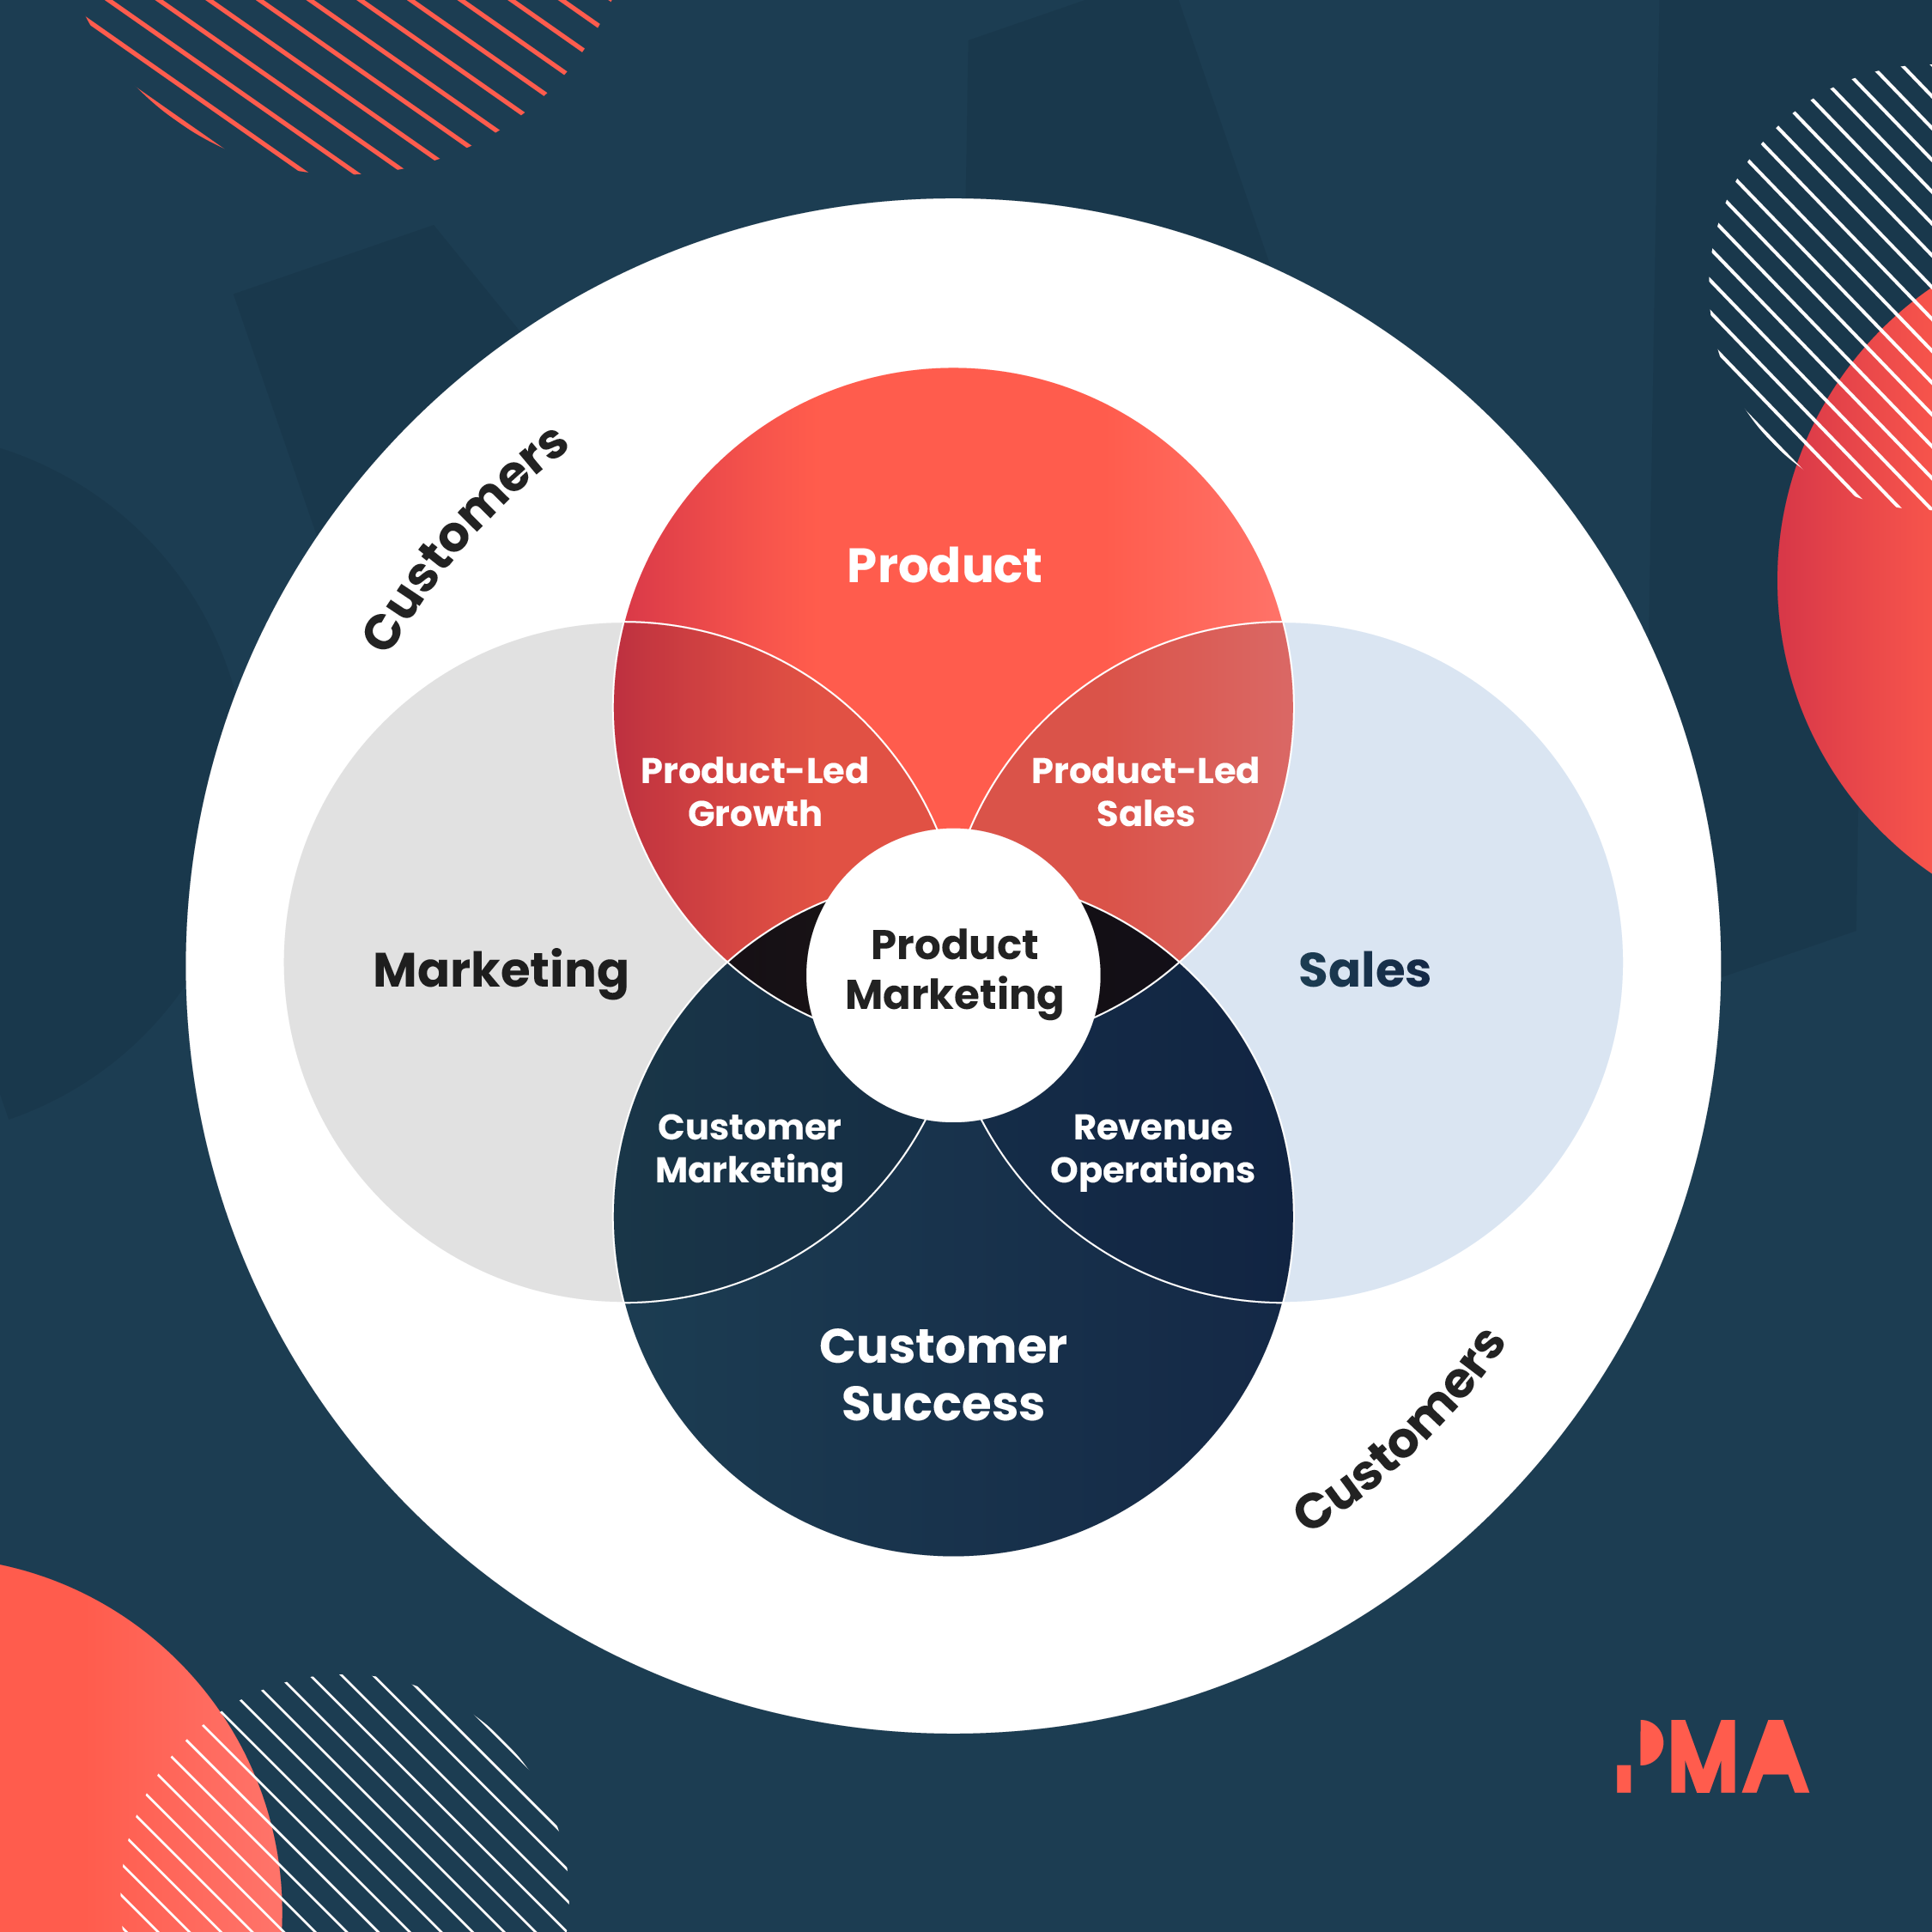 Product Marketing Alliance explains what product marketing is in 6 simple areas